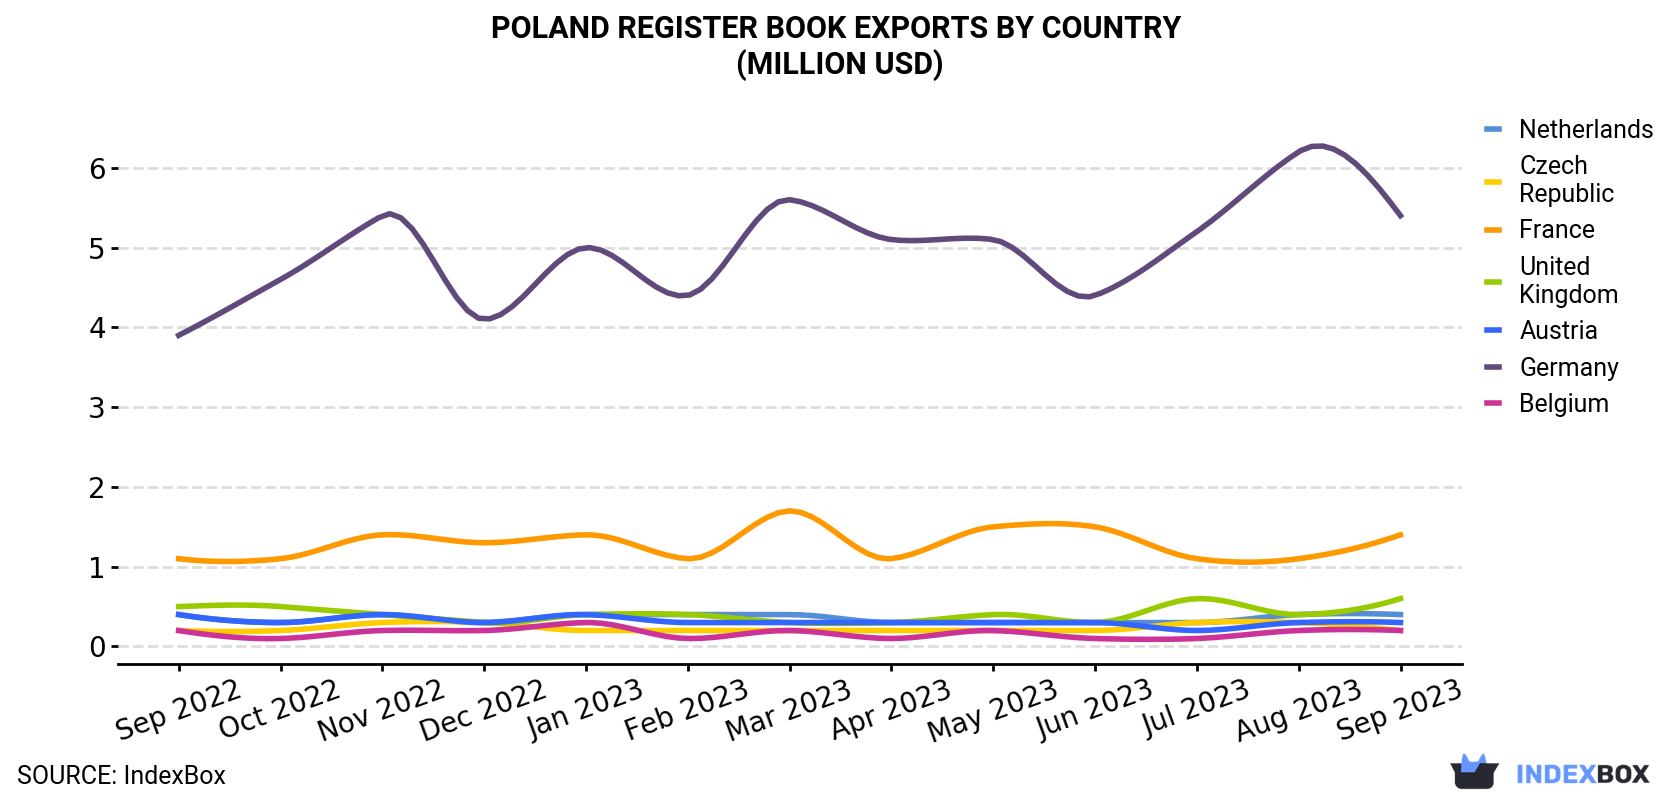 Poland Register Book Exports By Country (Million USD)